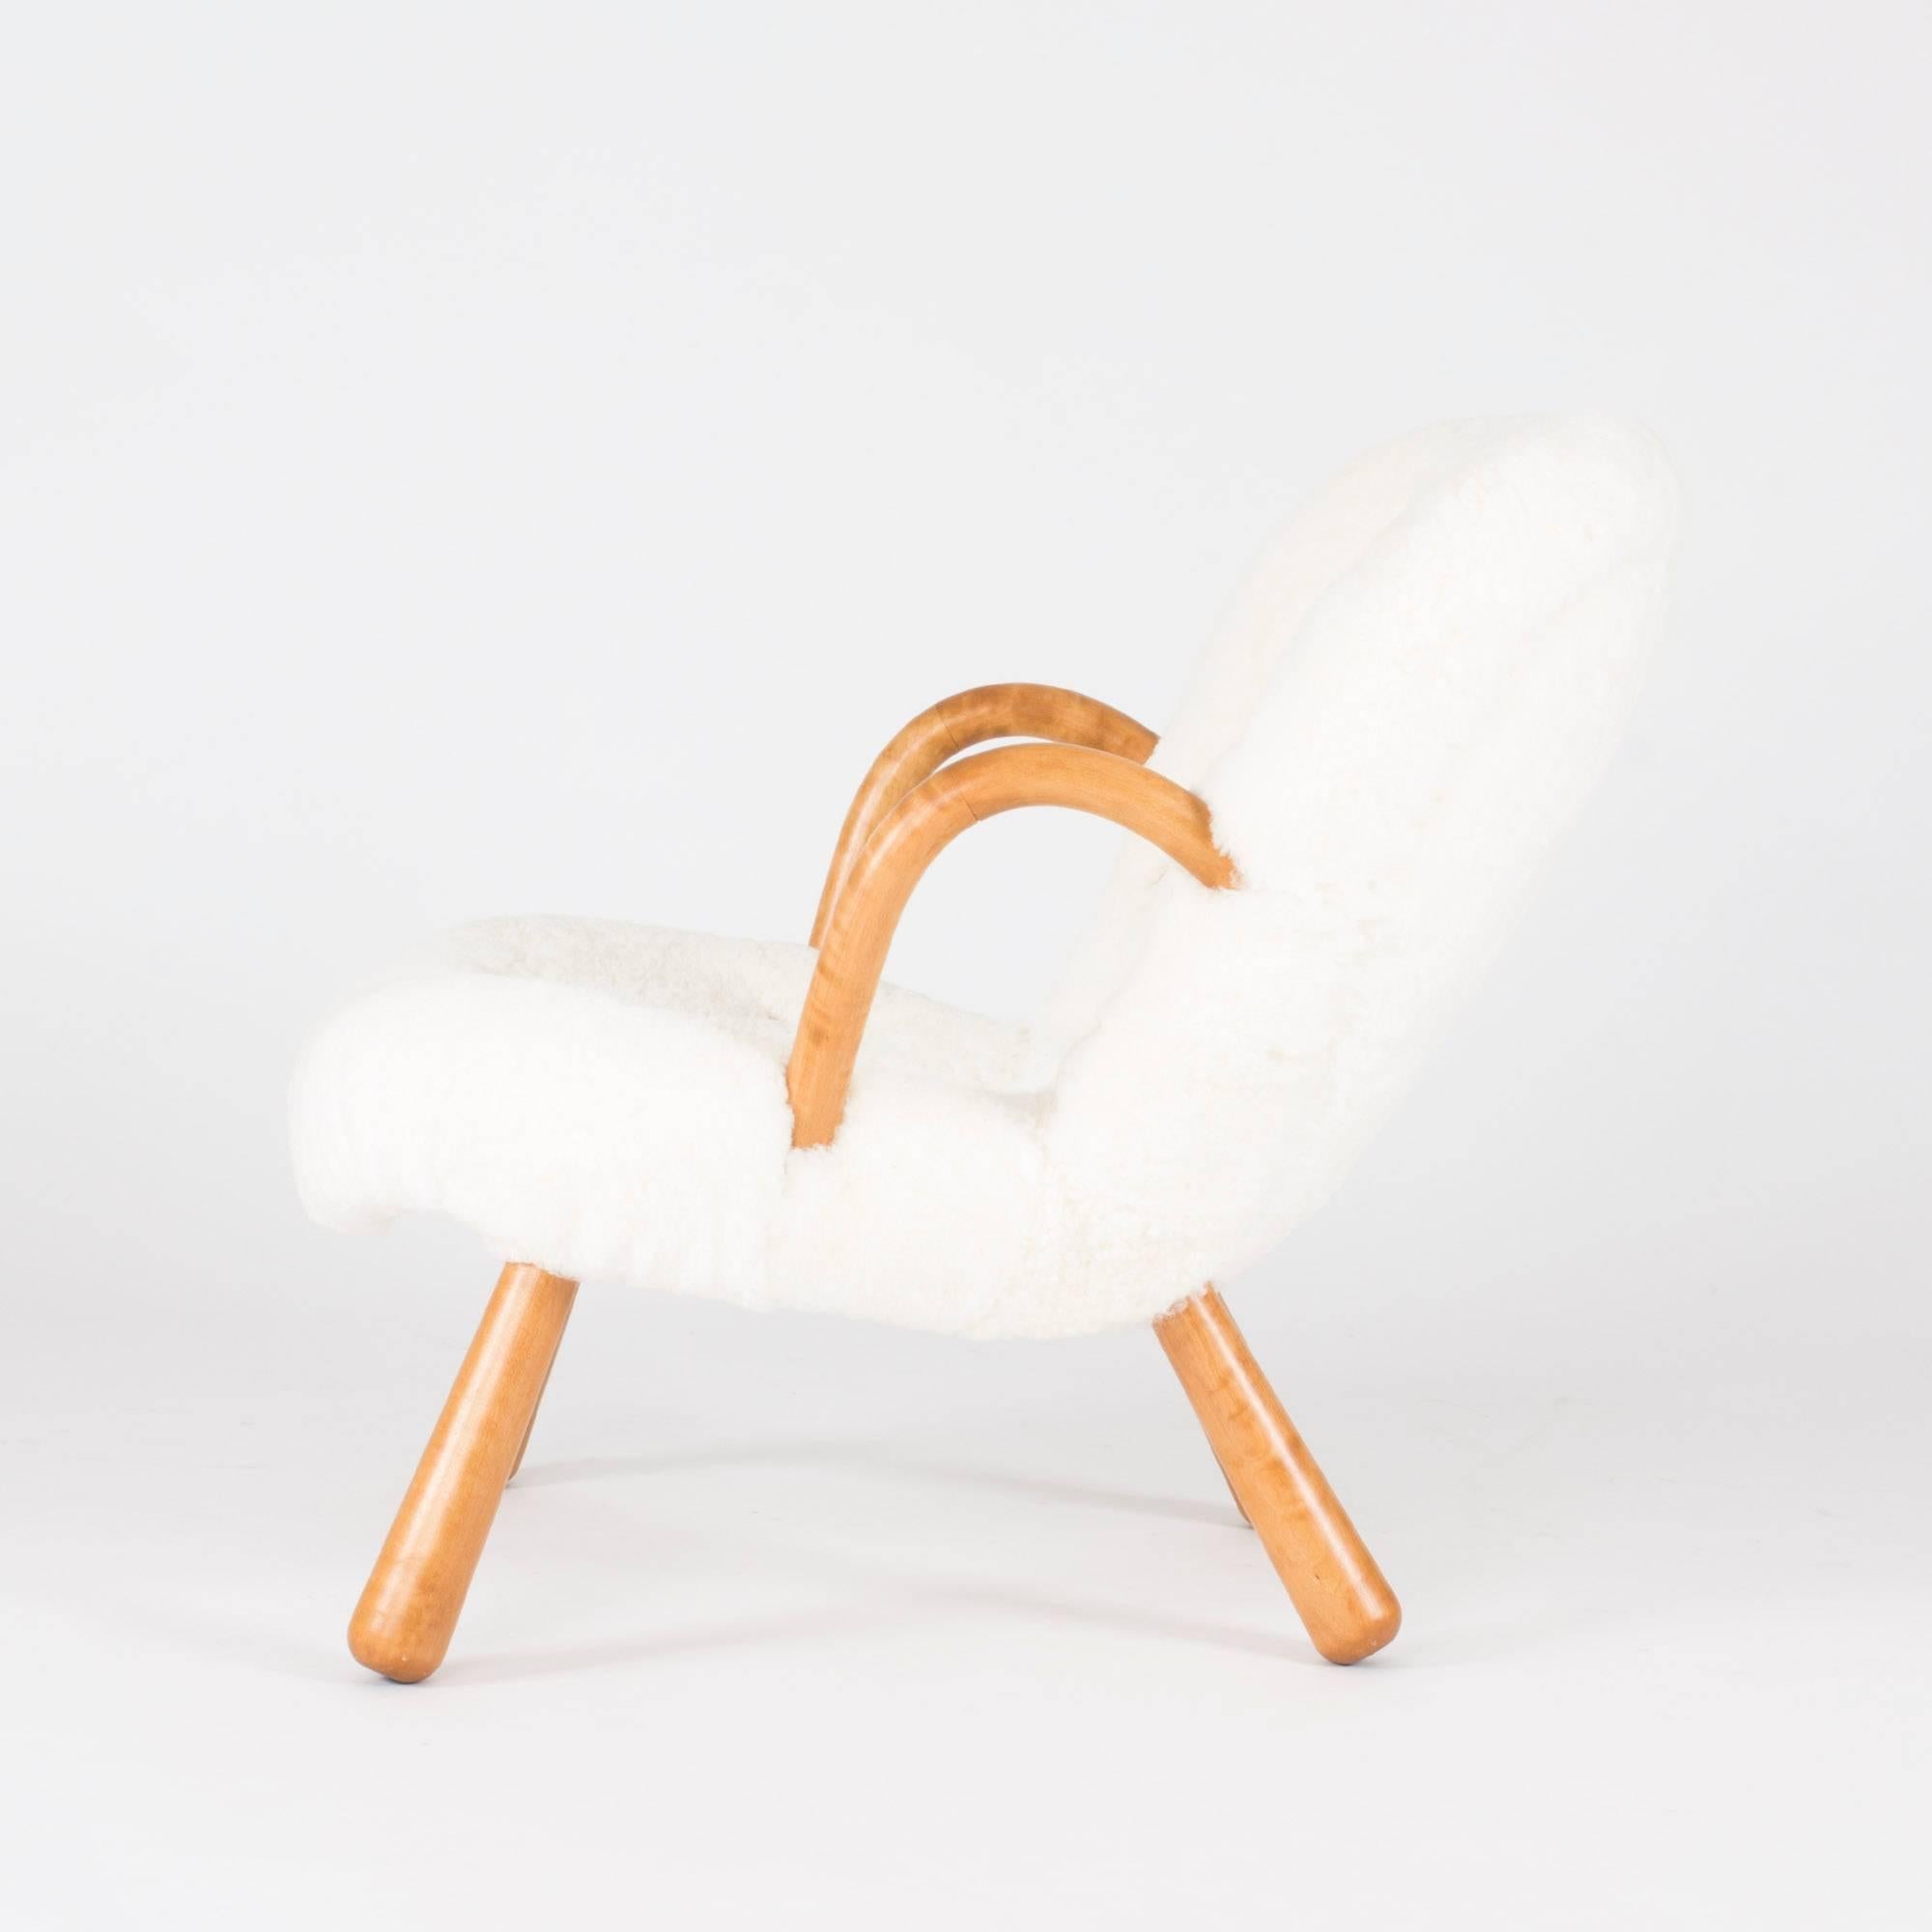 Incomparably inviting “Clam Chair” lounge chair by Philip Arctander. Curved wooden armrests and club like legs. Upholstered with fuzzy white sheepskin. The buttons on the backrest are dressed with light brown leather that matches the color of the